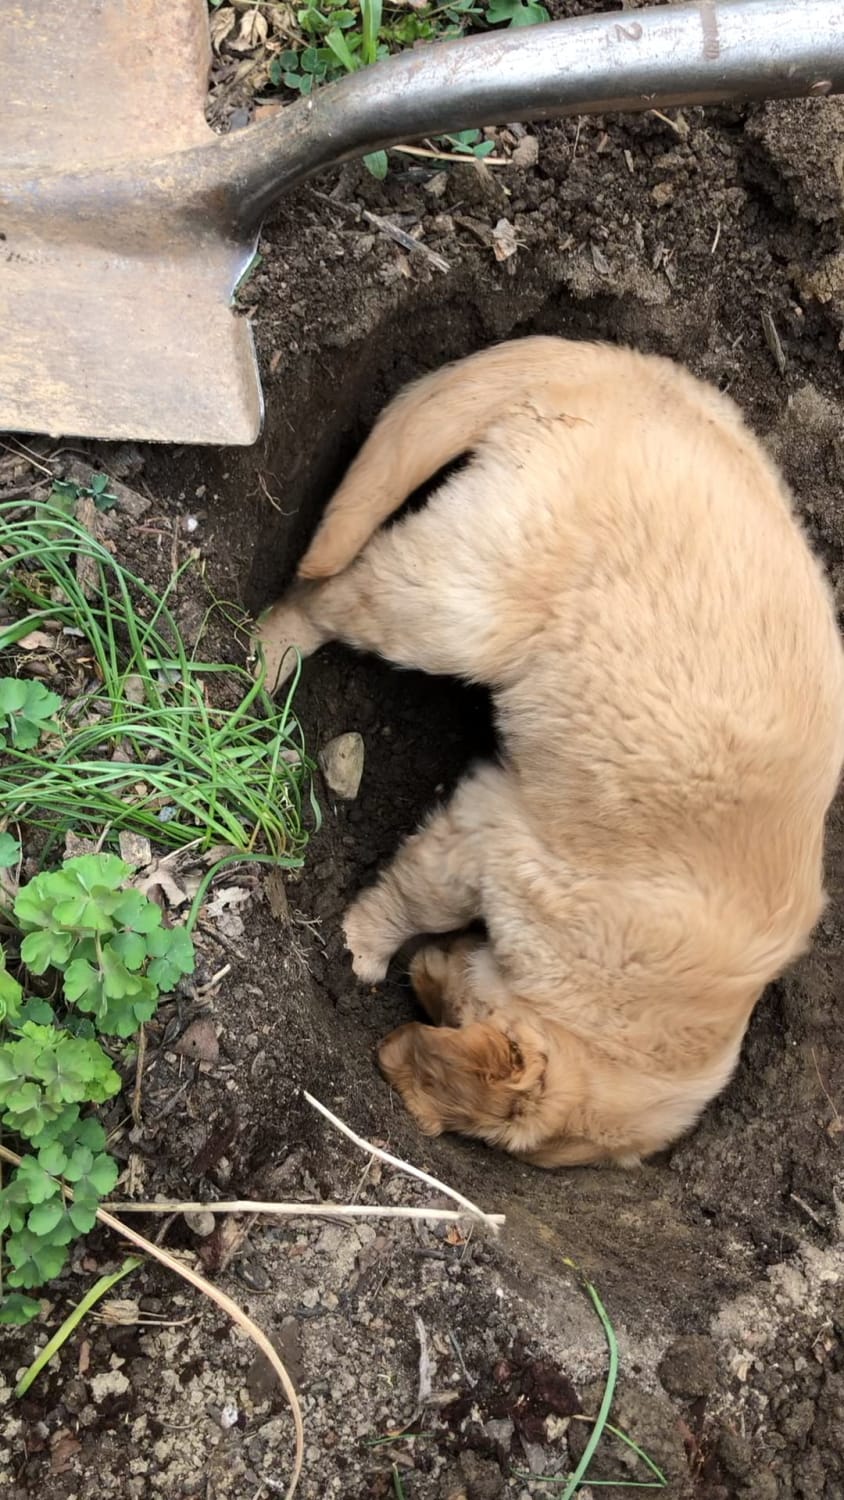 My parents just got a new puppy. She really likes to help with yardwork, but she gets tired easily!